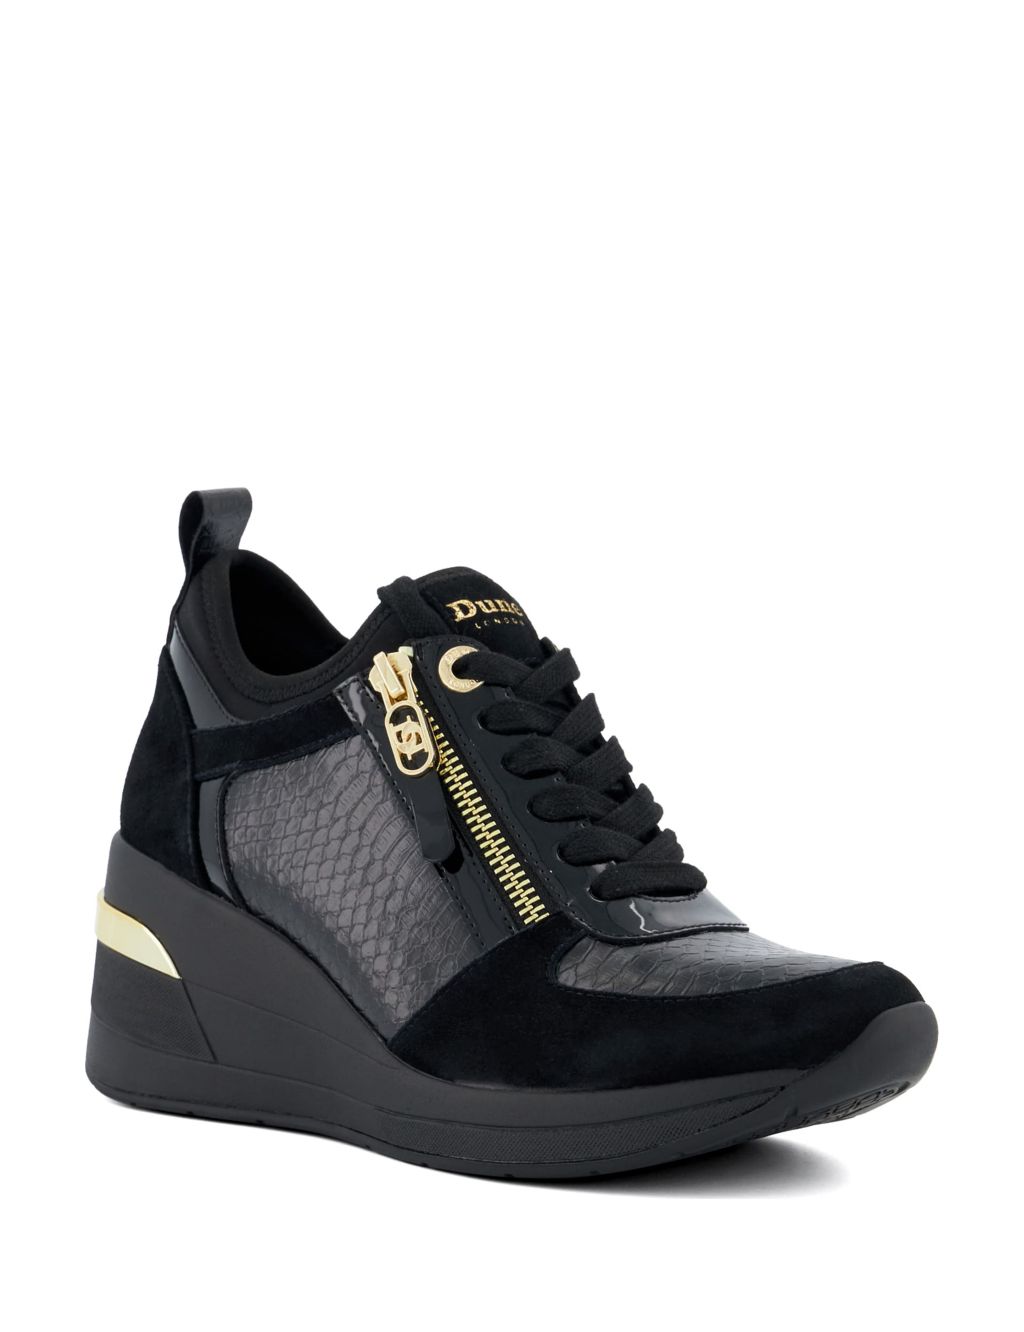 Leather Lace Up Side Detail Wedge Trainers | Dune London | M&S